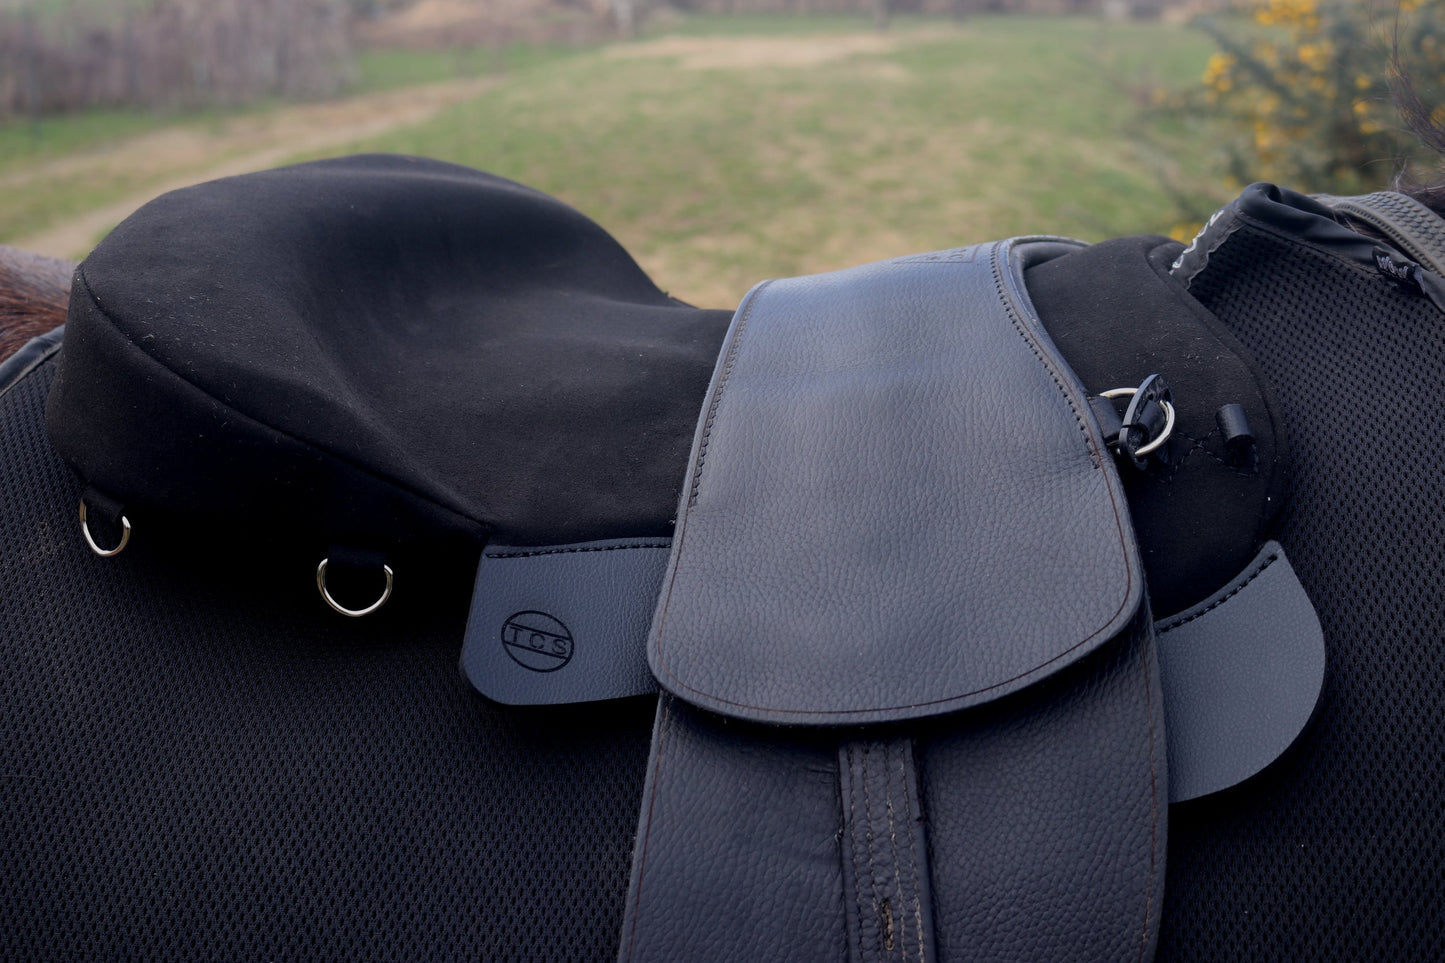 Ex Trial Saddle Seat Pad for your Total Contact Saddle